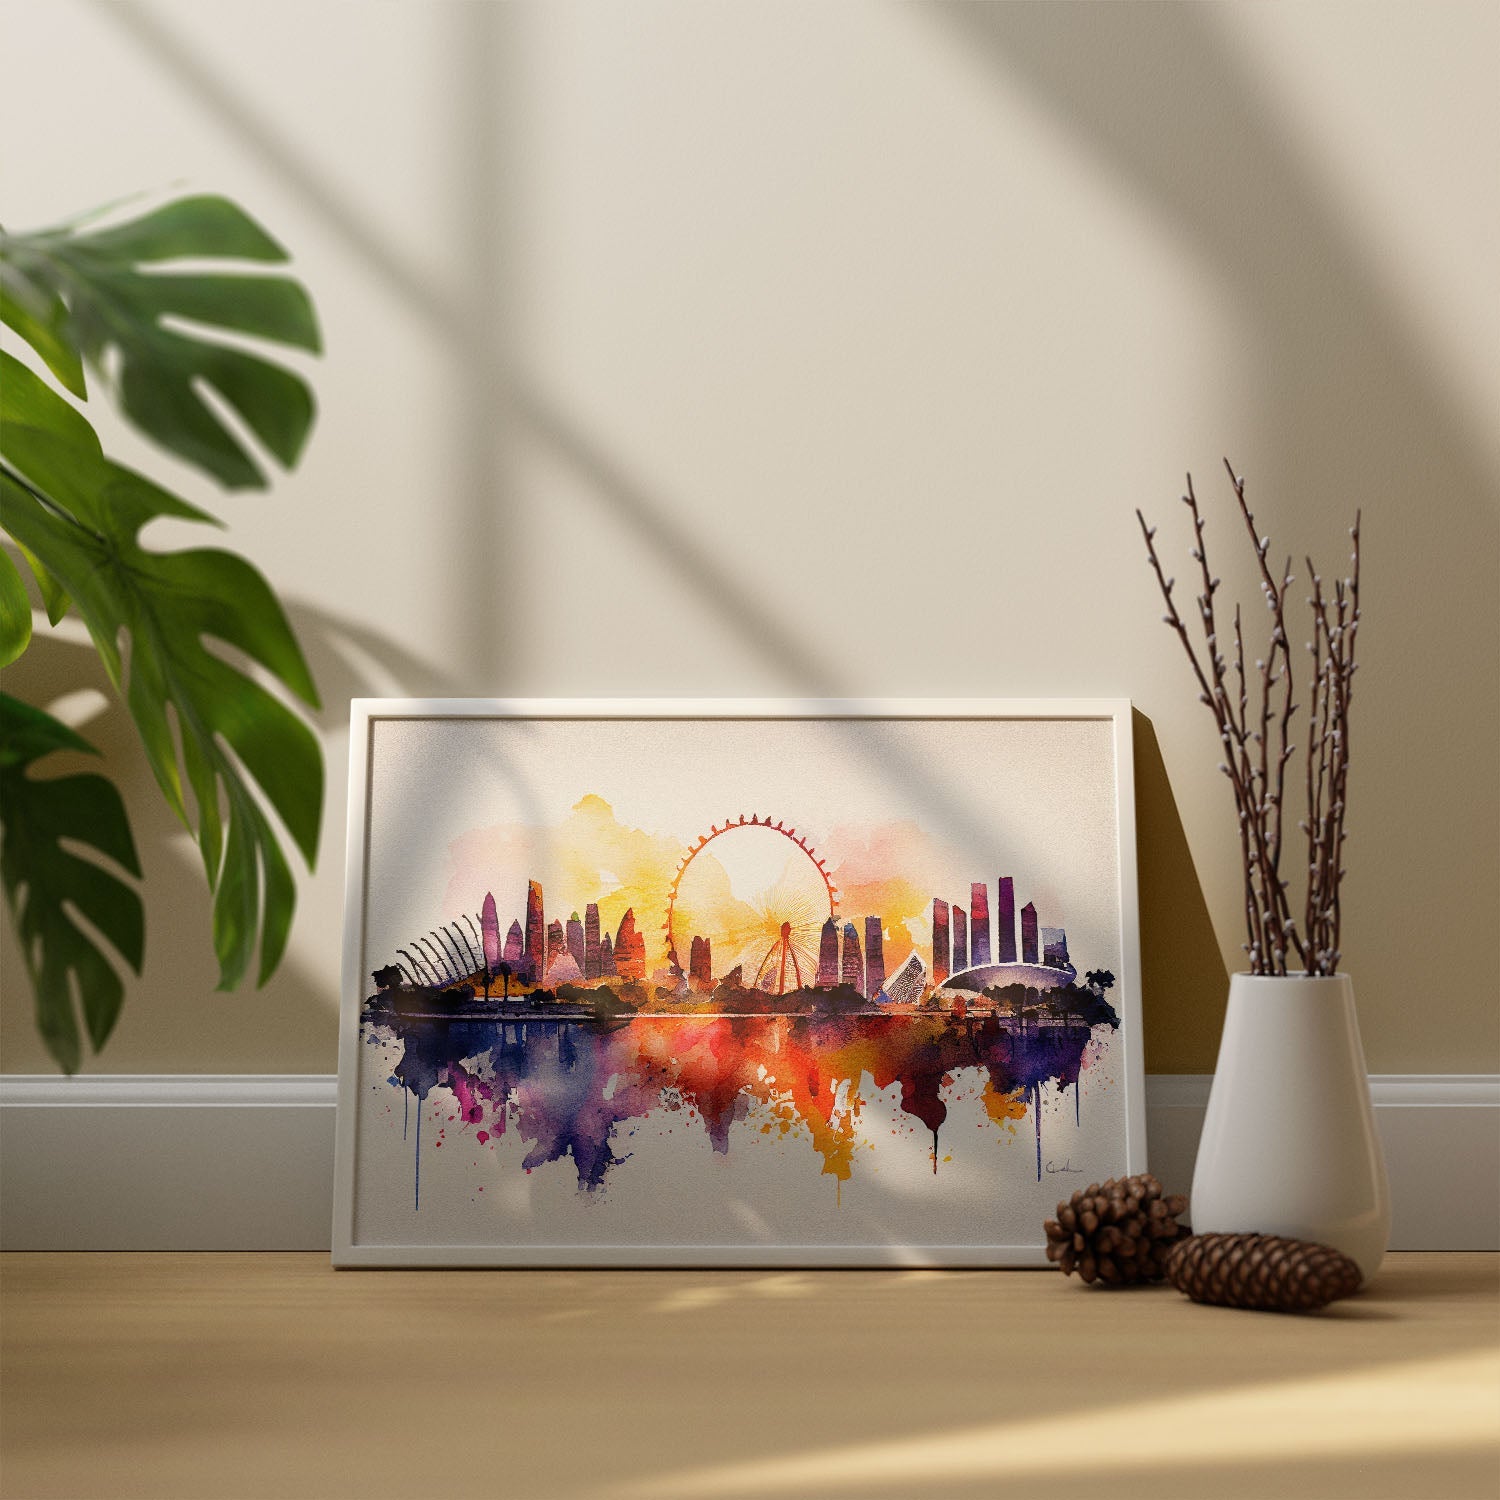 Nacnic watercolor of a skyline of the city of Singapore_3. Aesthetic Wall Art Prints for Bedroom or Living Room Design.-Artwork-Nacnic-A4-Sin Marco-Nacnic Estudio SL